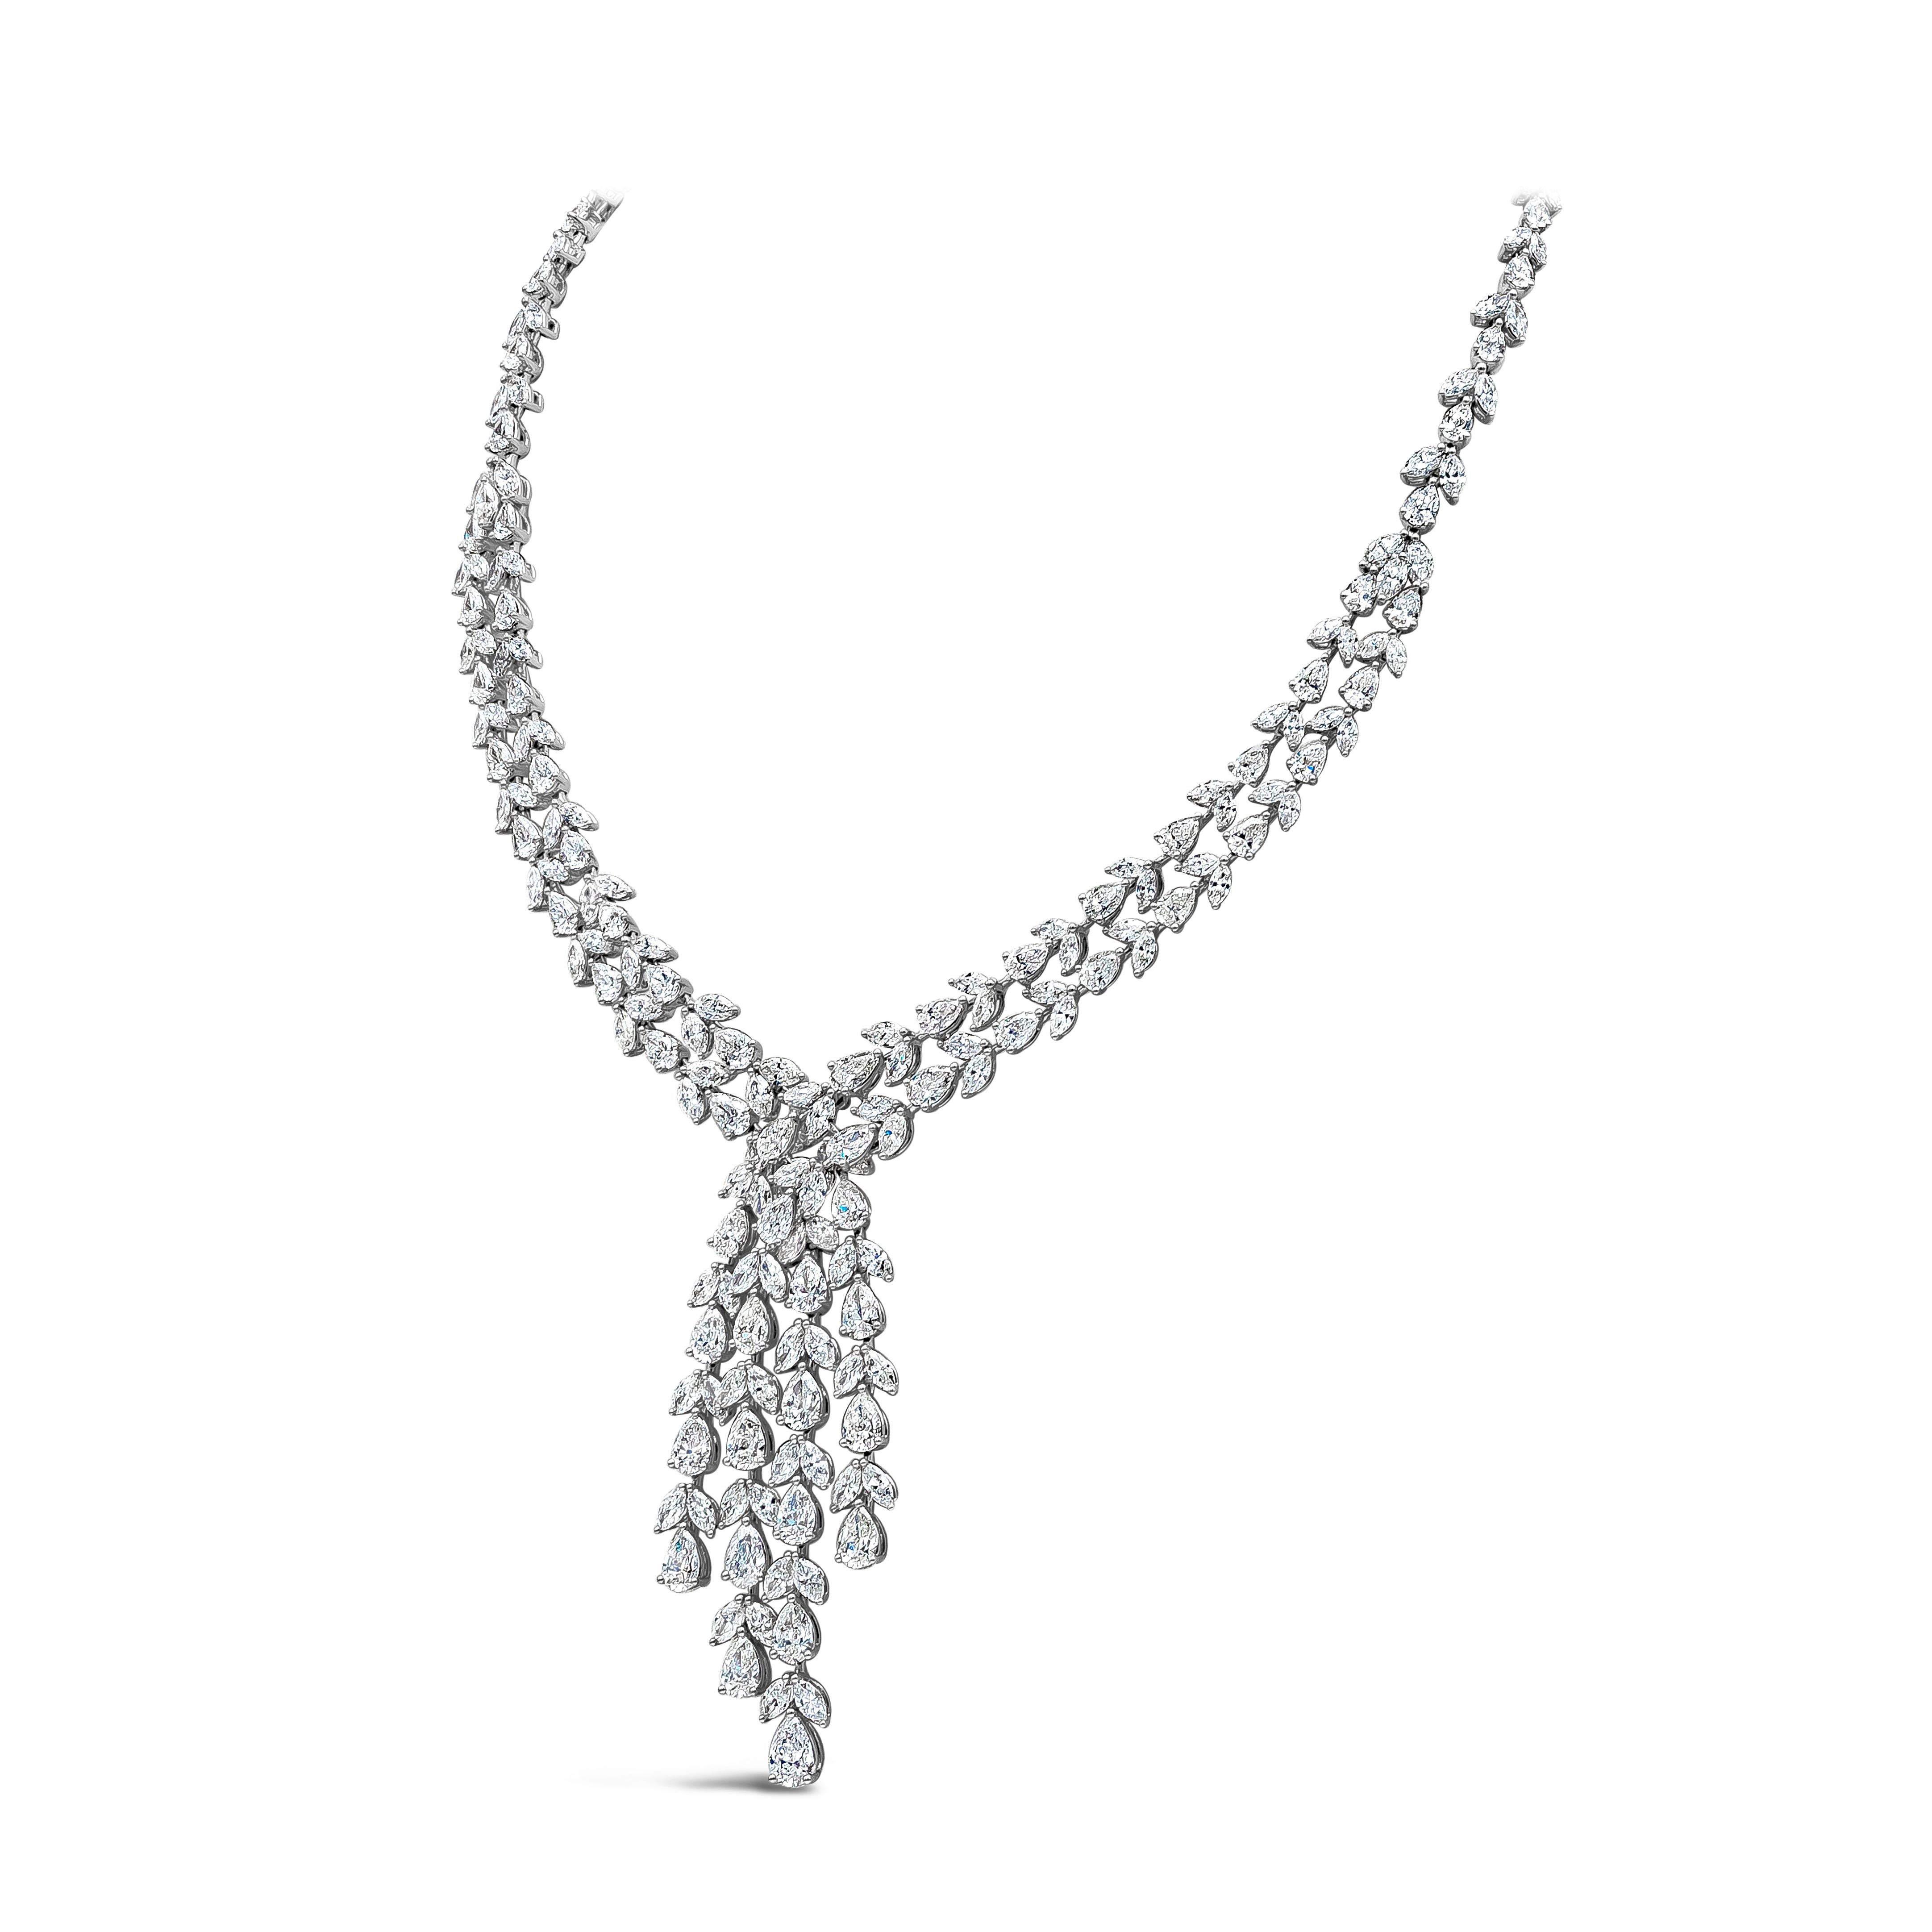 An elegant and well-crafted high end necklace, showcasing a cluster of mixed pear and marquise cut diamonds weighing 41.21 carats total with D-G color and VS-SI clarity. Made with 18K white gold. Perfect necklace to wear at galas and other luxurious